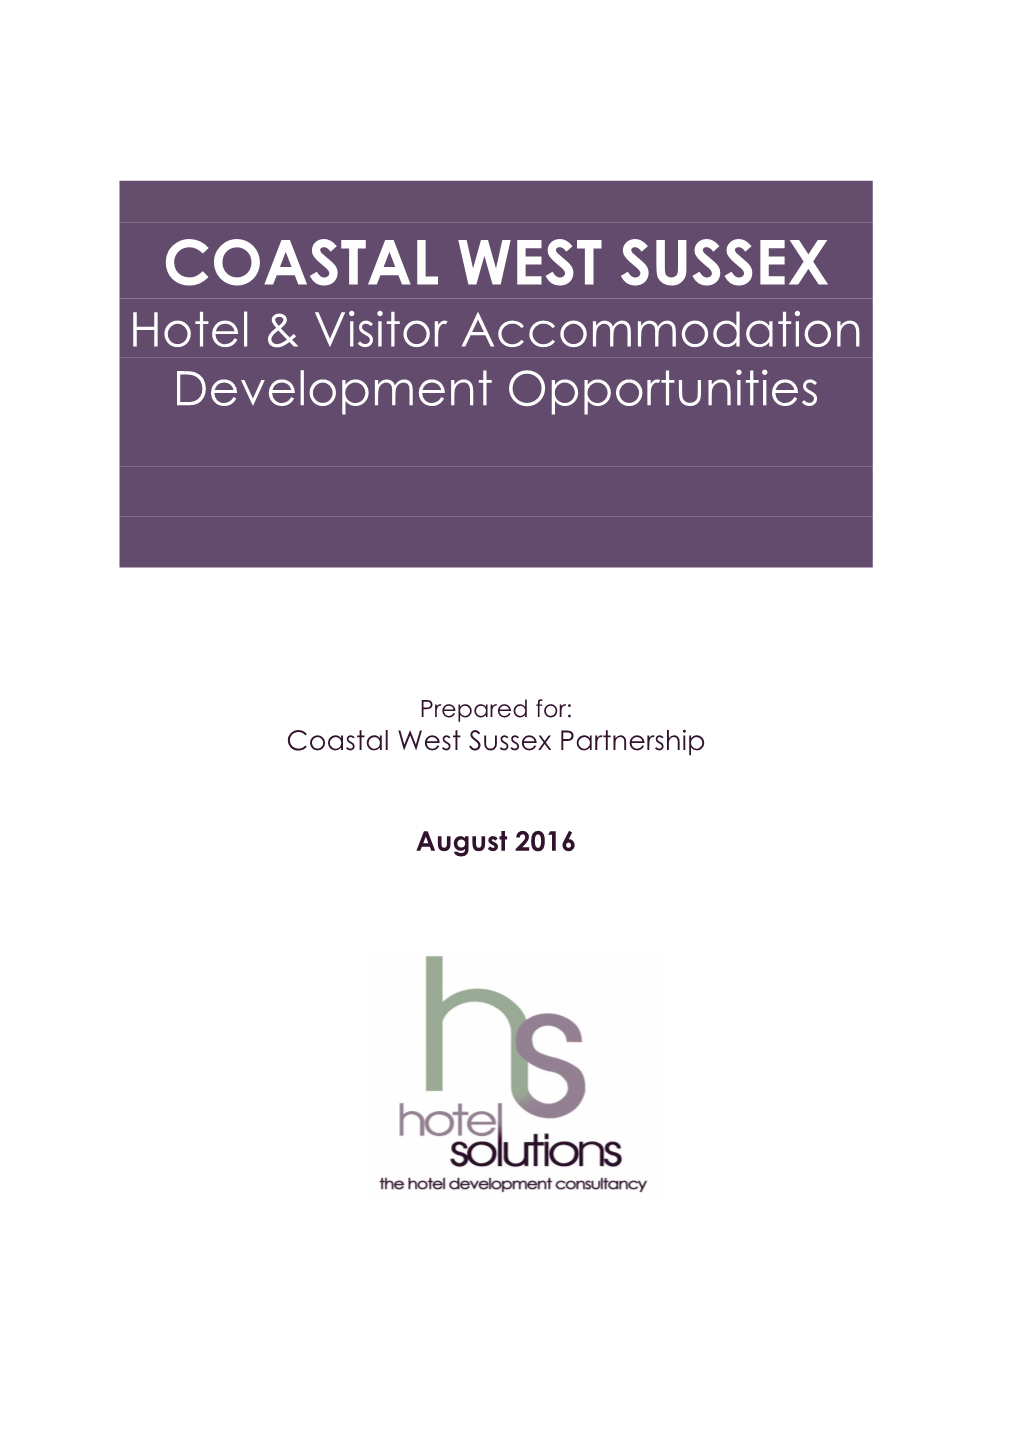 COASTAL WEST SUSSEX Hotel & Visitor Accommodation Development Opportunities